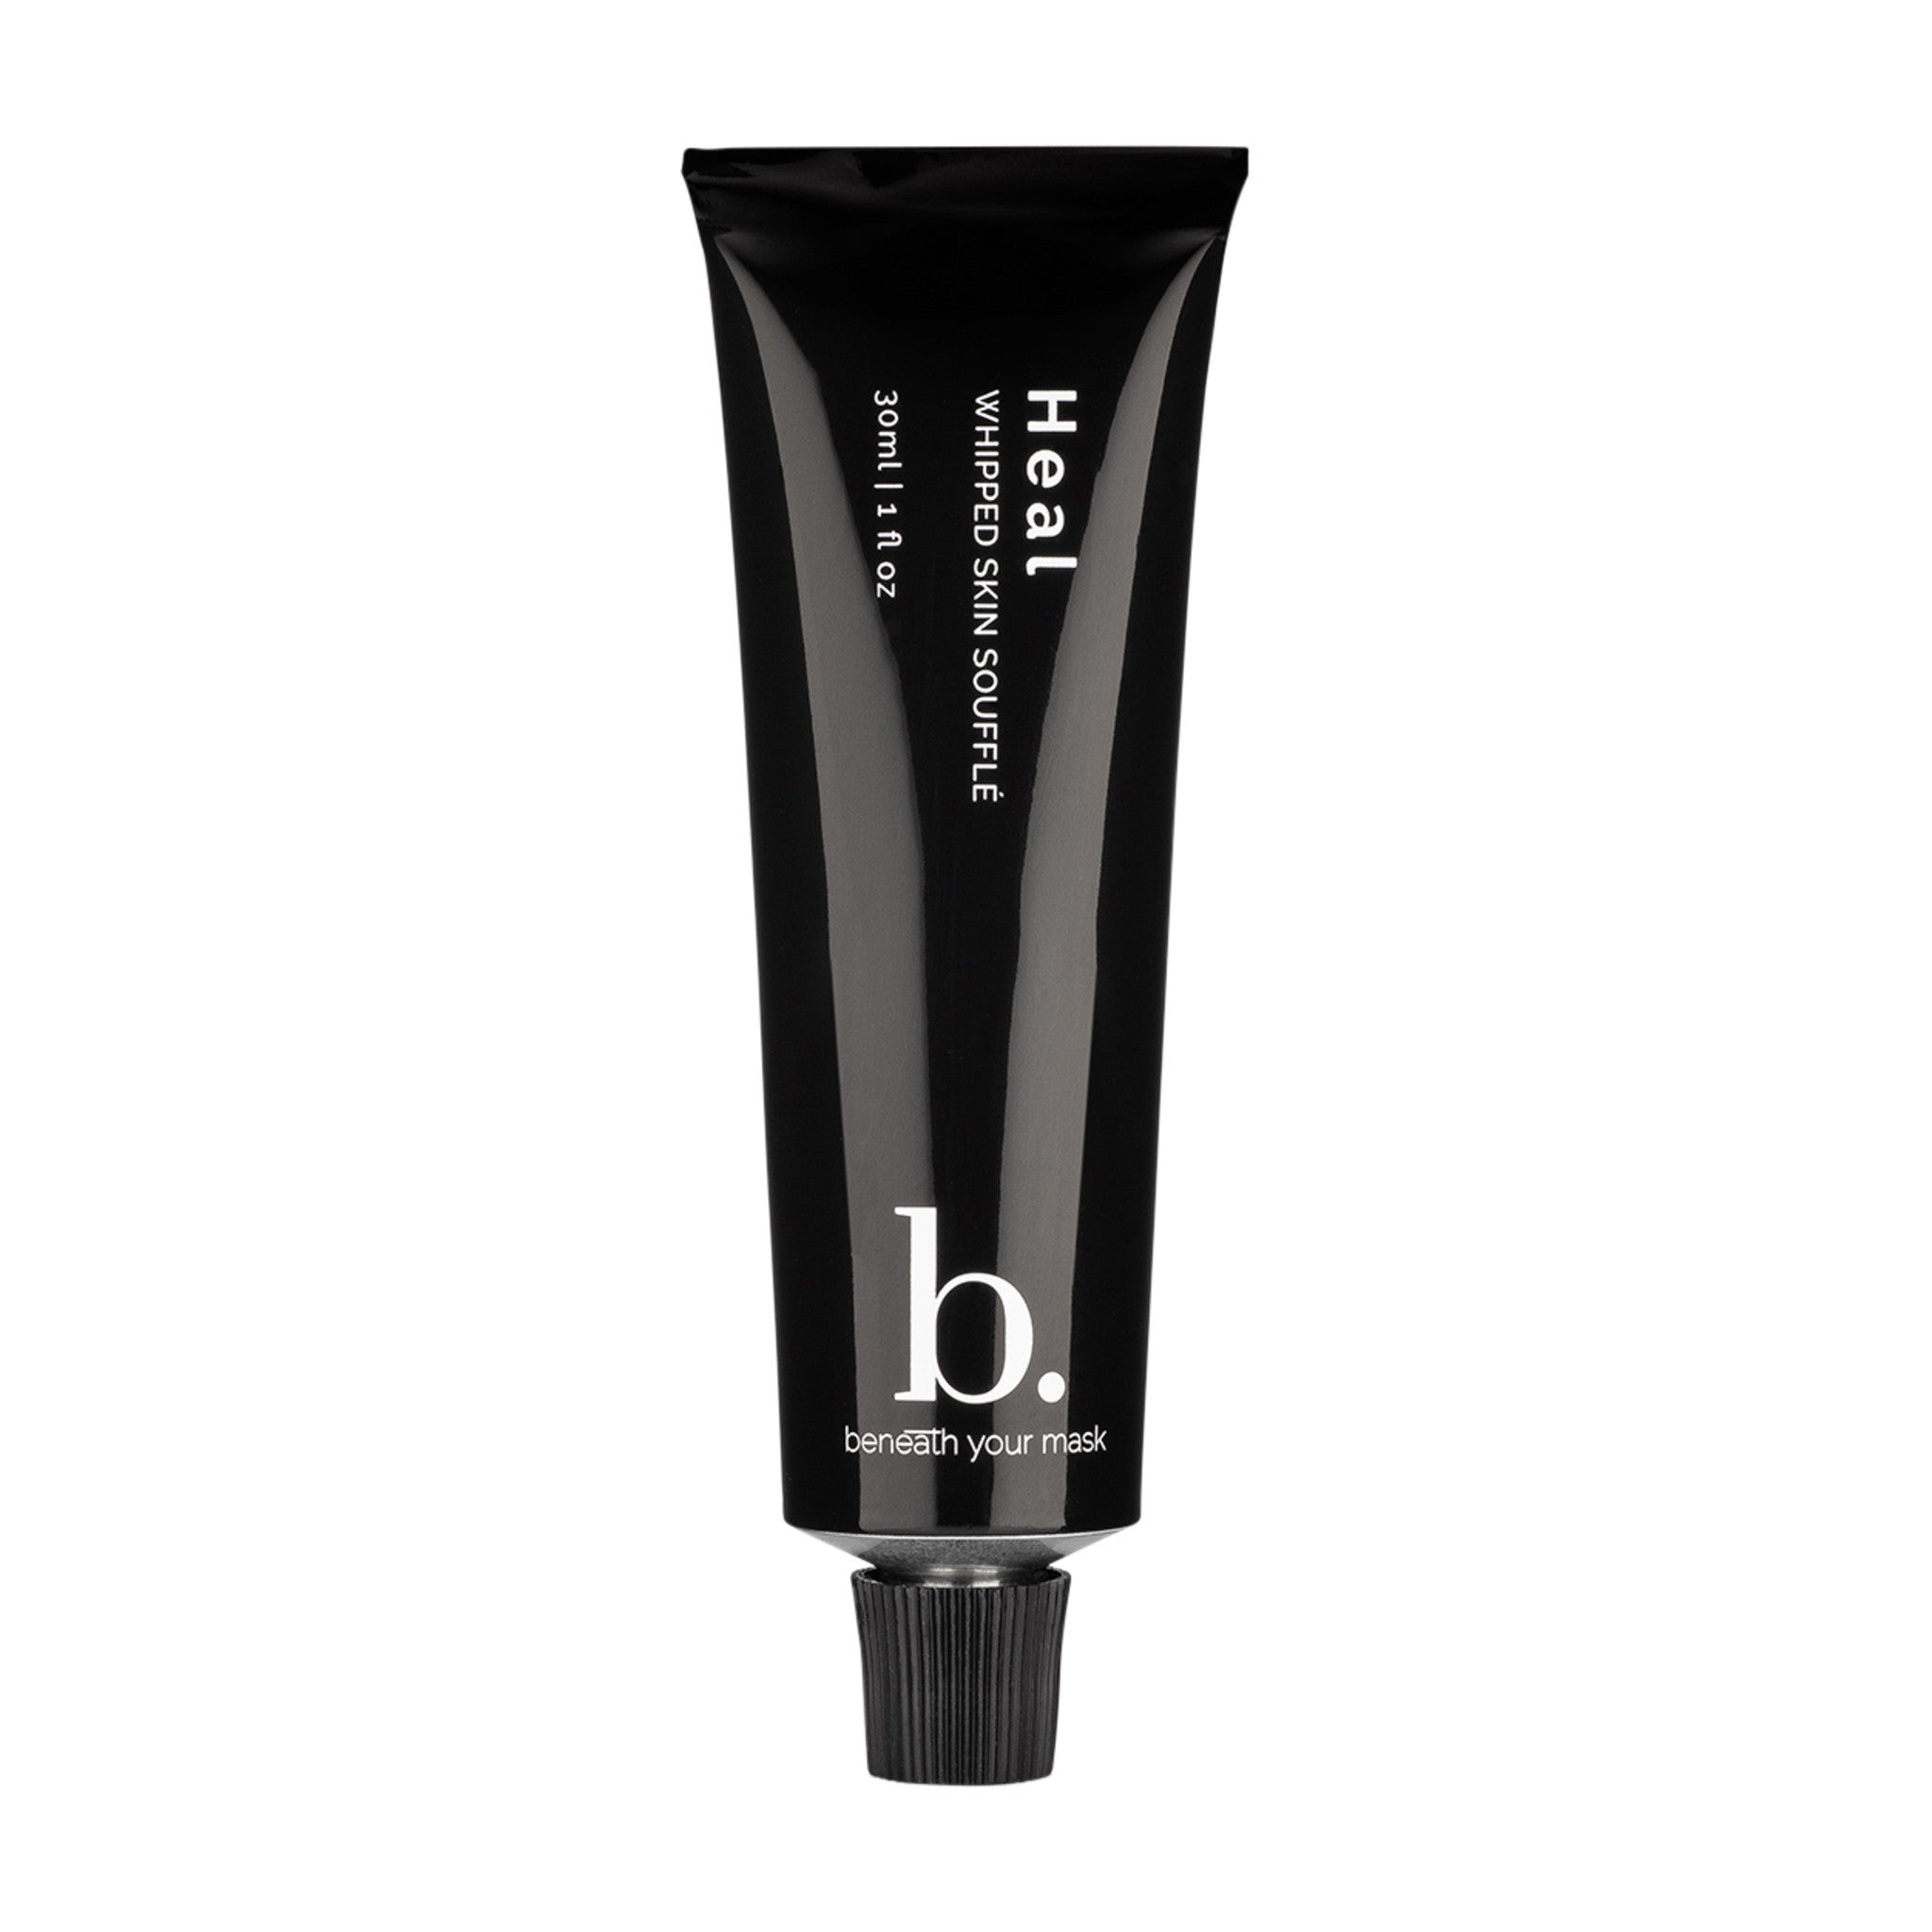 Beneath Your Mask Heal Whipped Skin Soufflé Size variant: 1 oz | 30 ml main image.